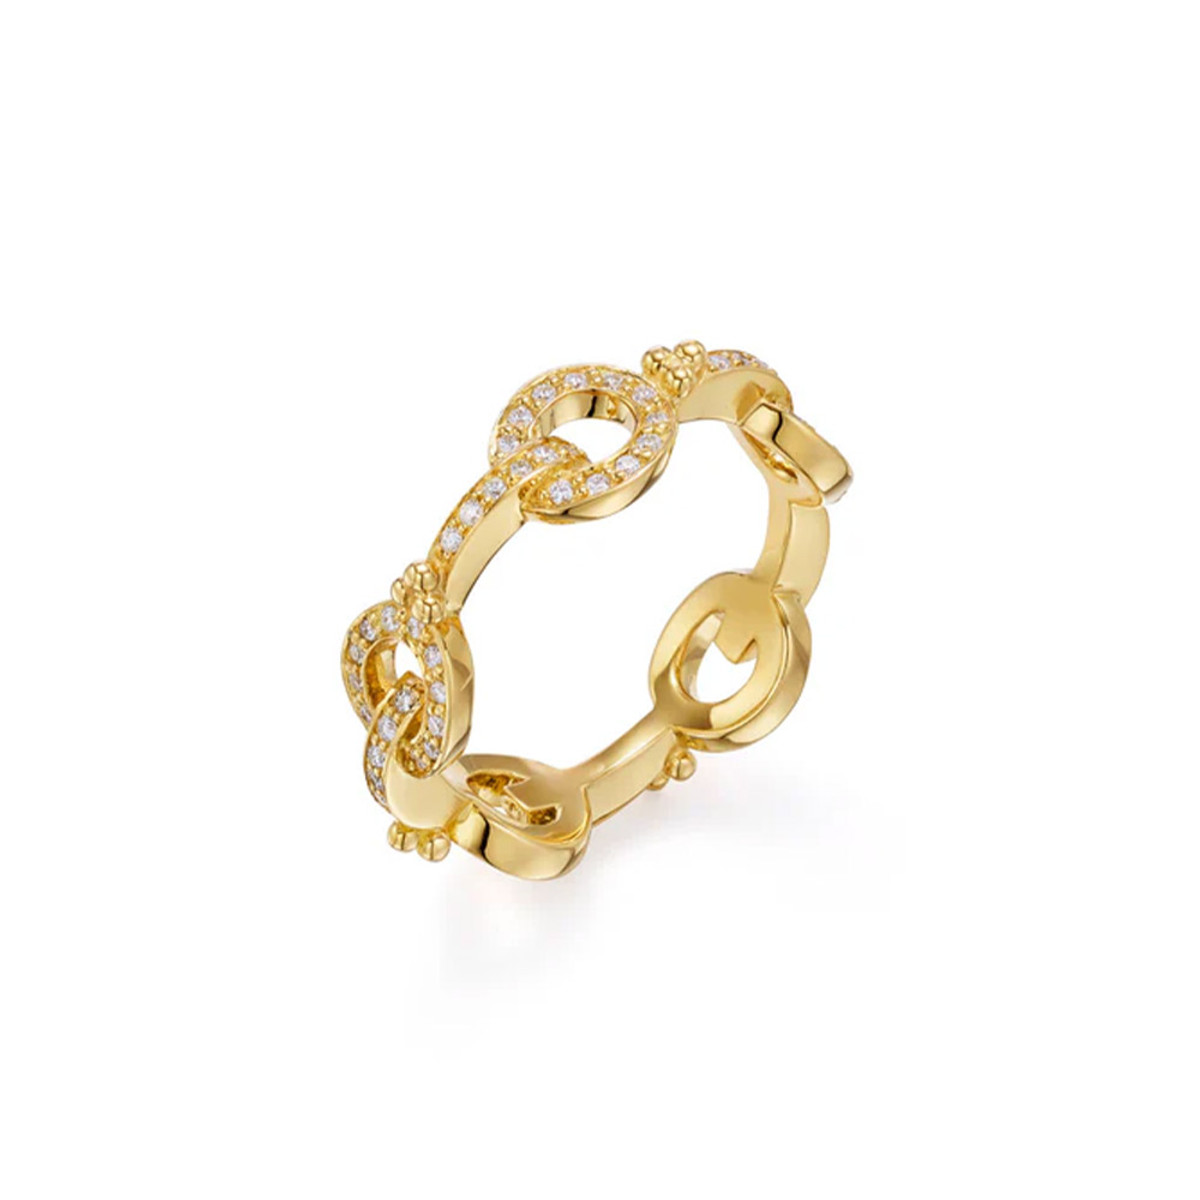 Temple St. Clair 18K Yellow Gold Diamond Orsina Ring-64908 Product Image